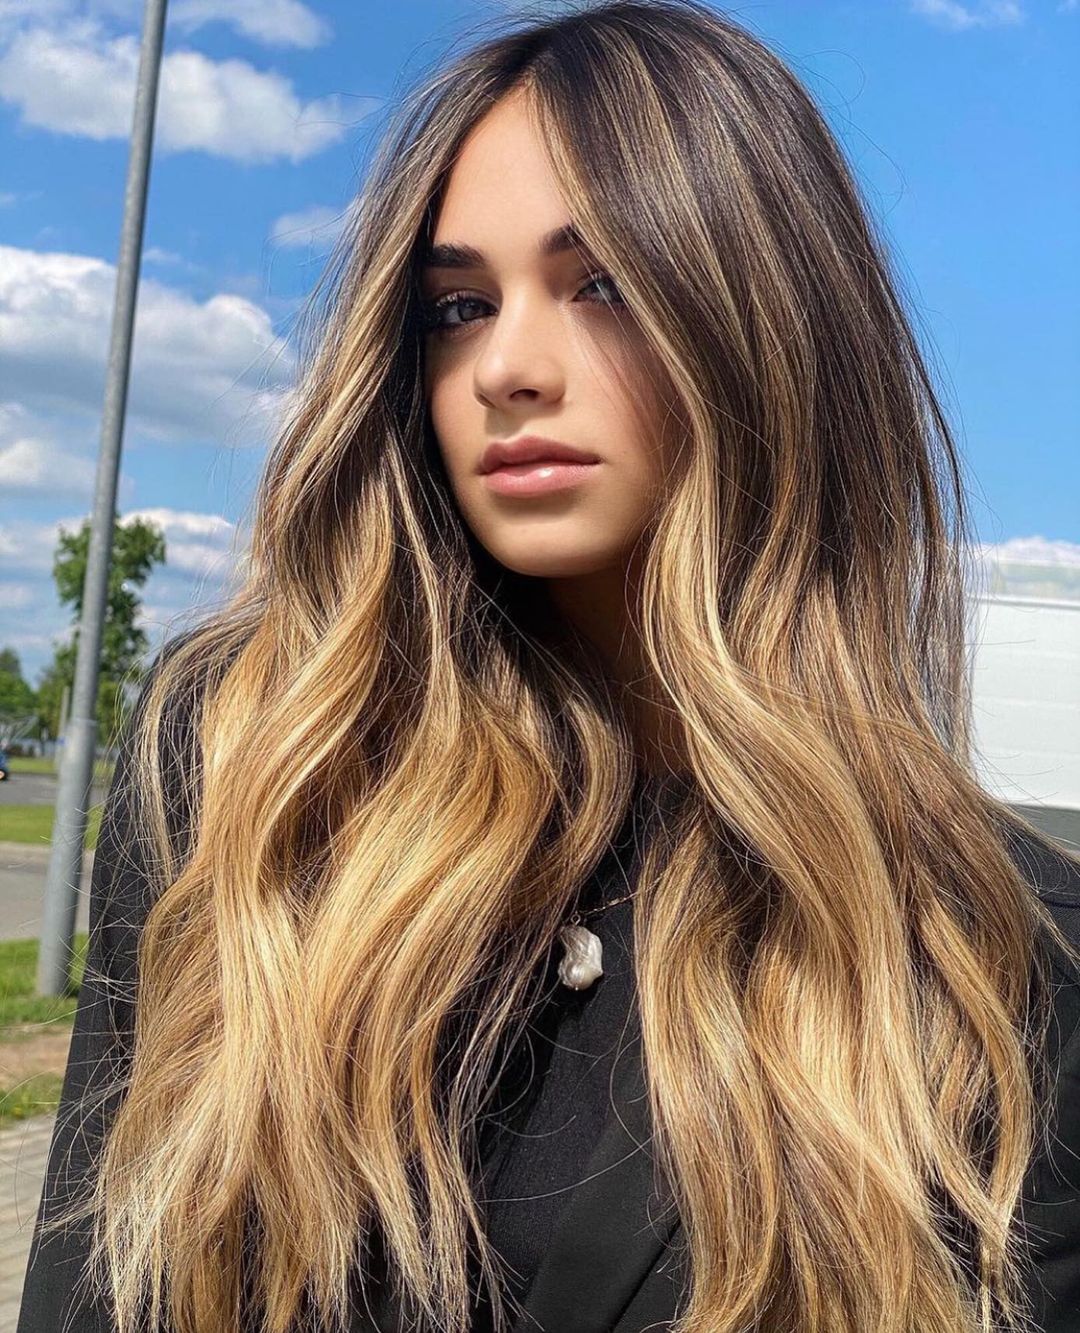 50 Awesome Long Layered Hair Ideas For 2021 images 5